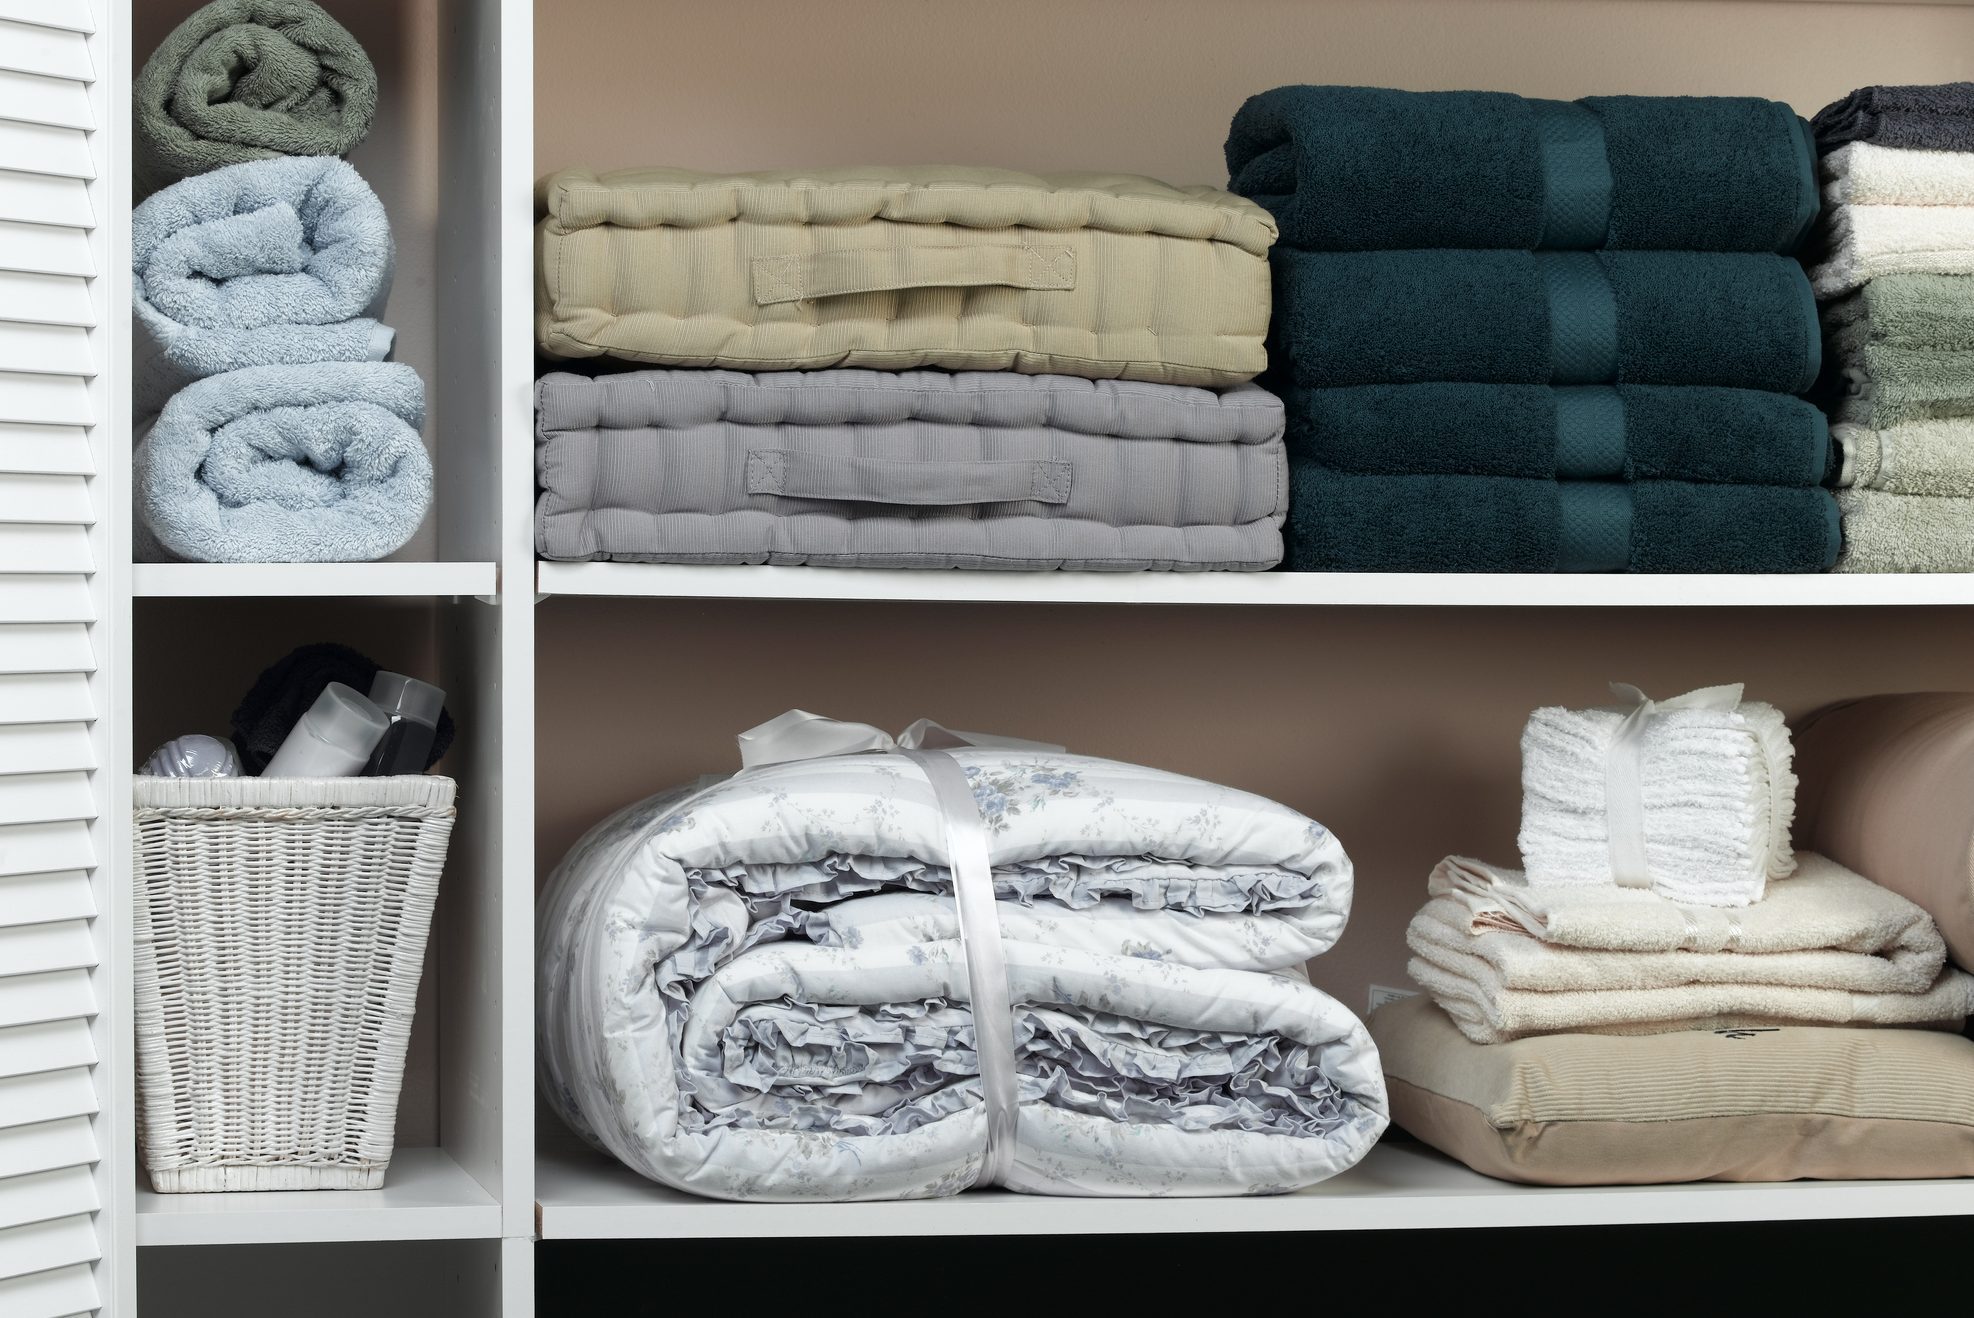 Linen Closet Organization with Baskets: A simple way to eliminate